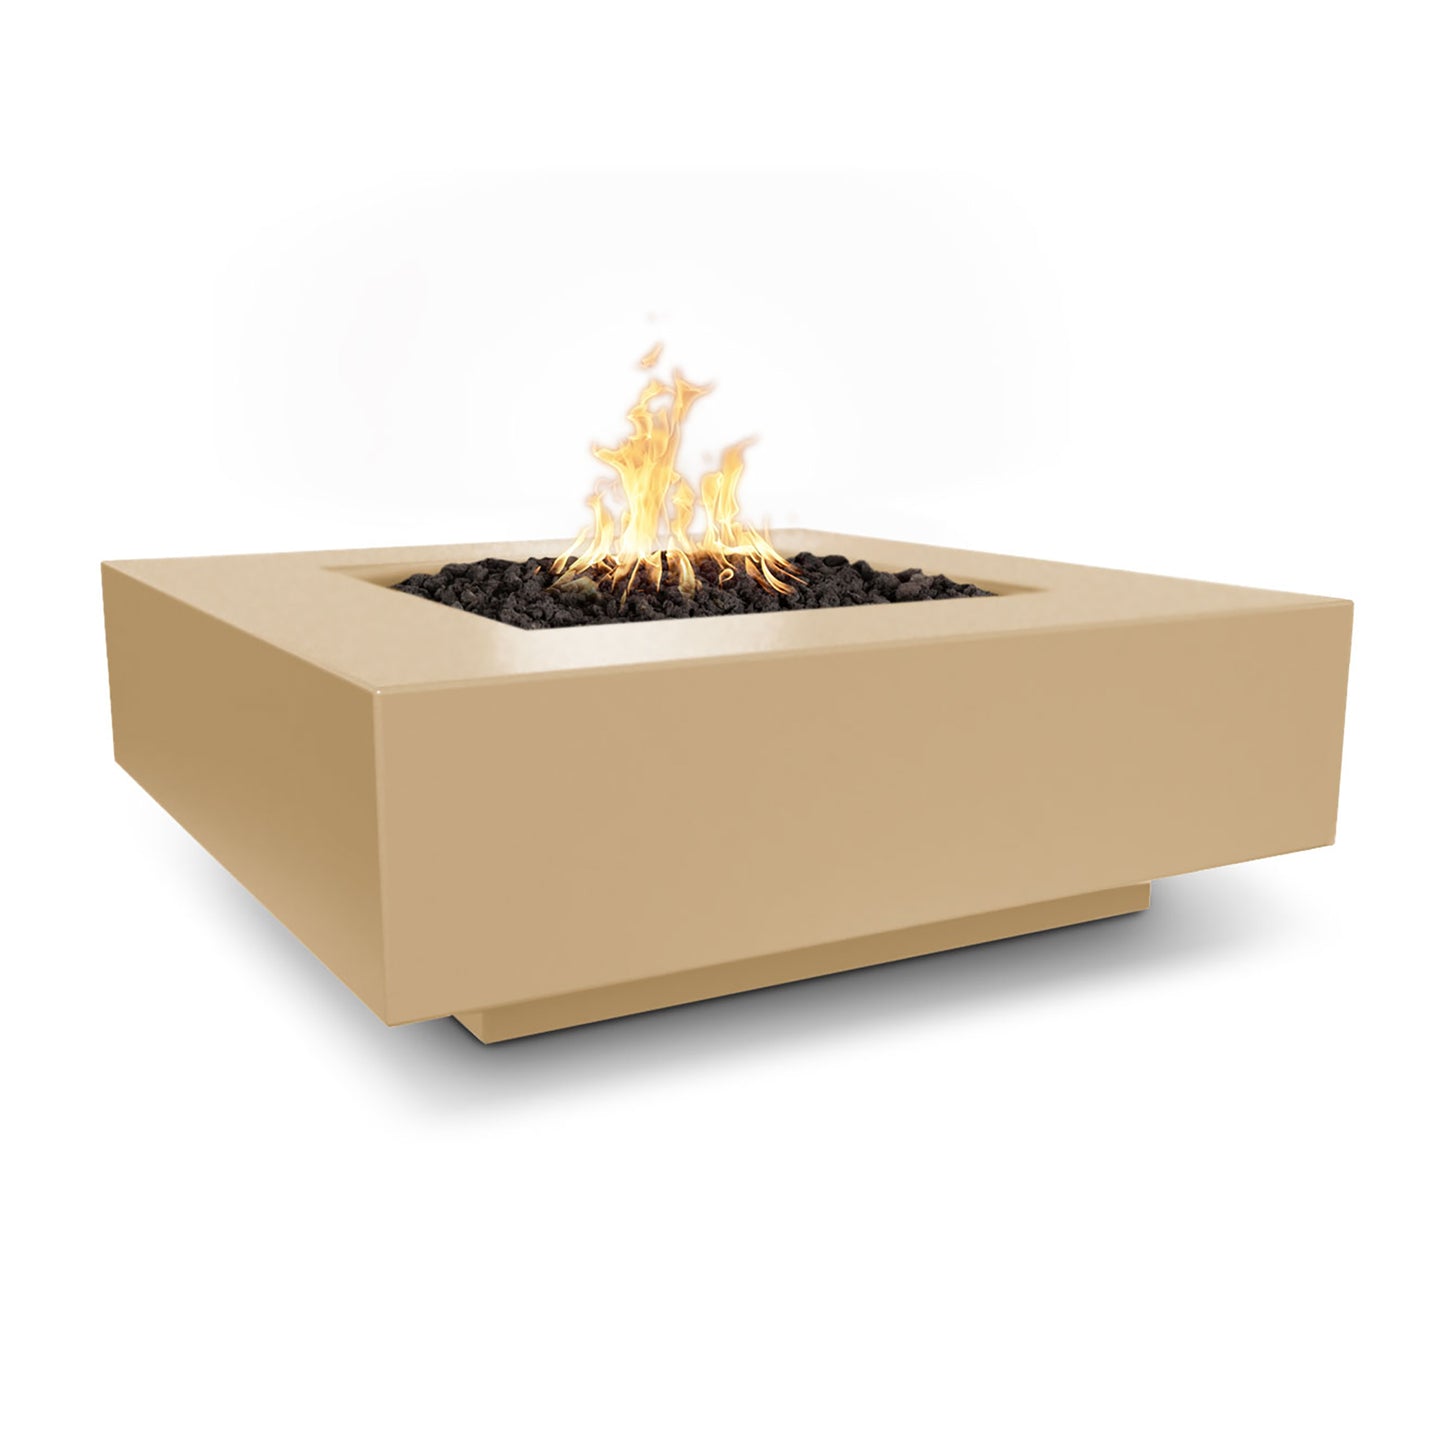 Cabo Square Concrete Fire Pit 36" - Electronic Ignition